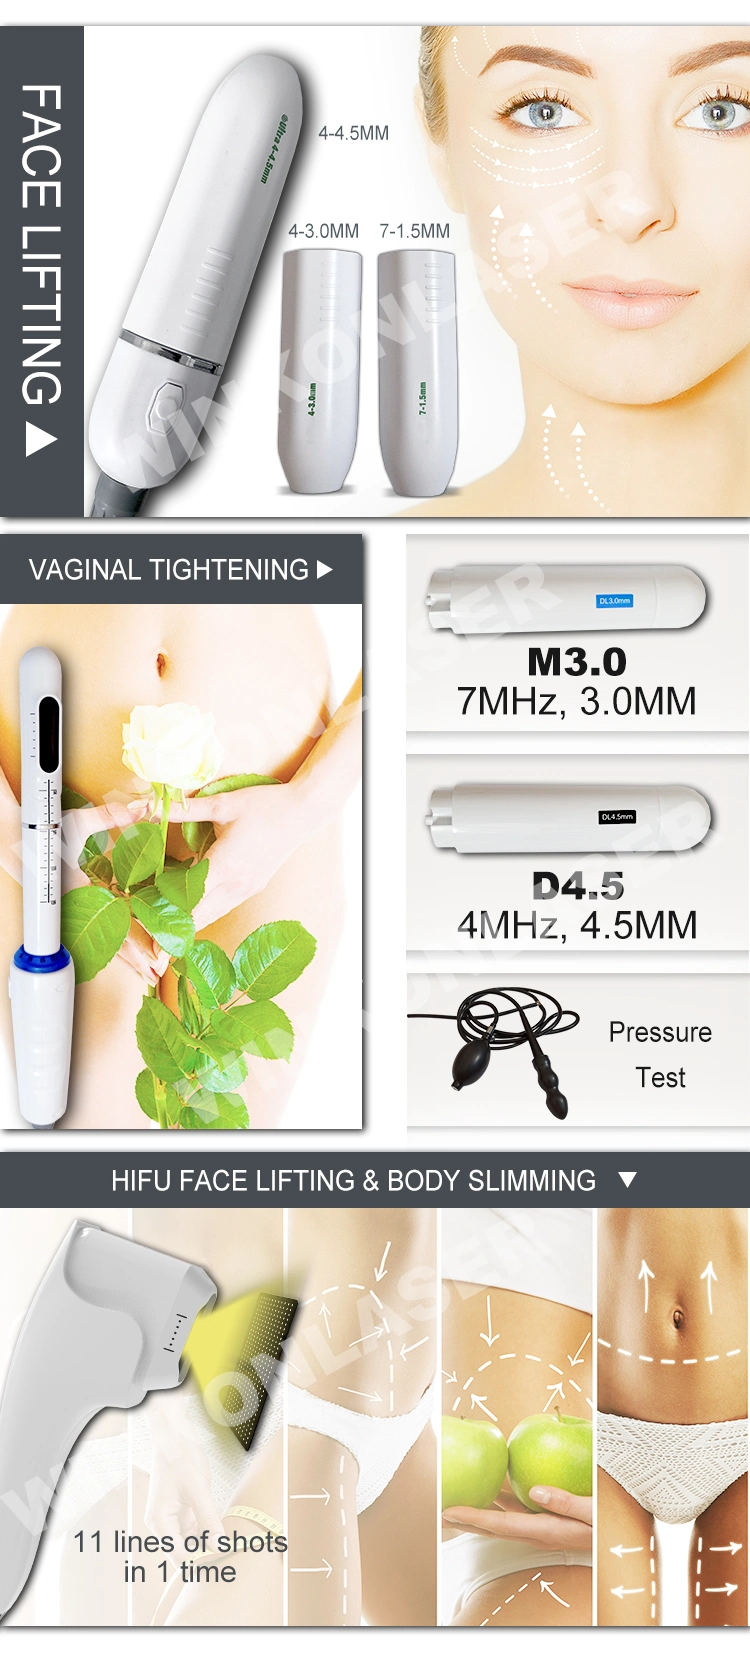 2021 New Trending Newest 5D 4D Hifu Korea Vaginal Tightening Machine Face Body Lifting Wrinkle Removal